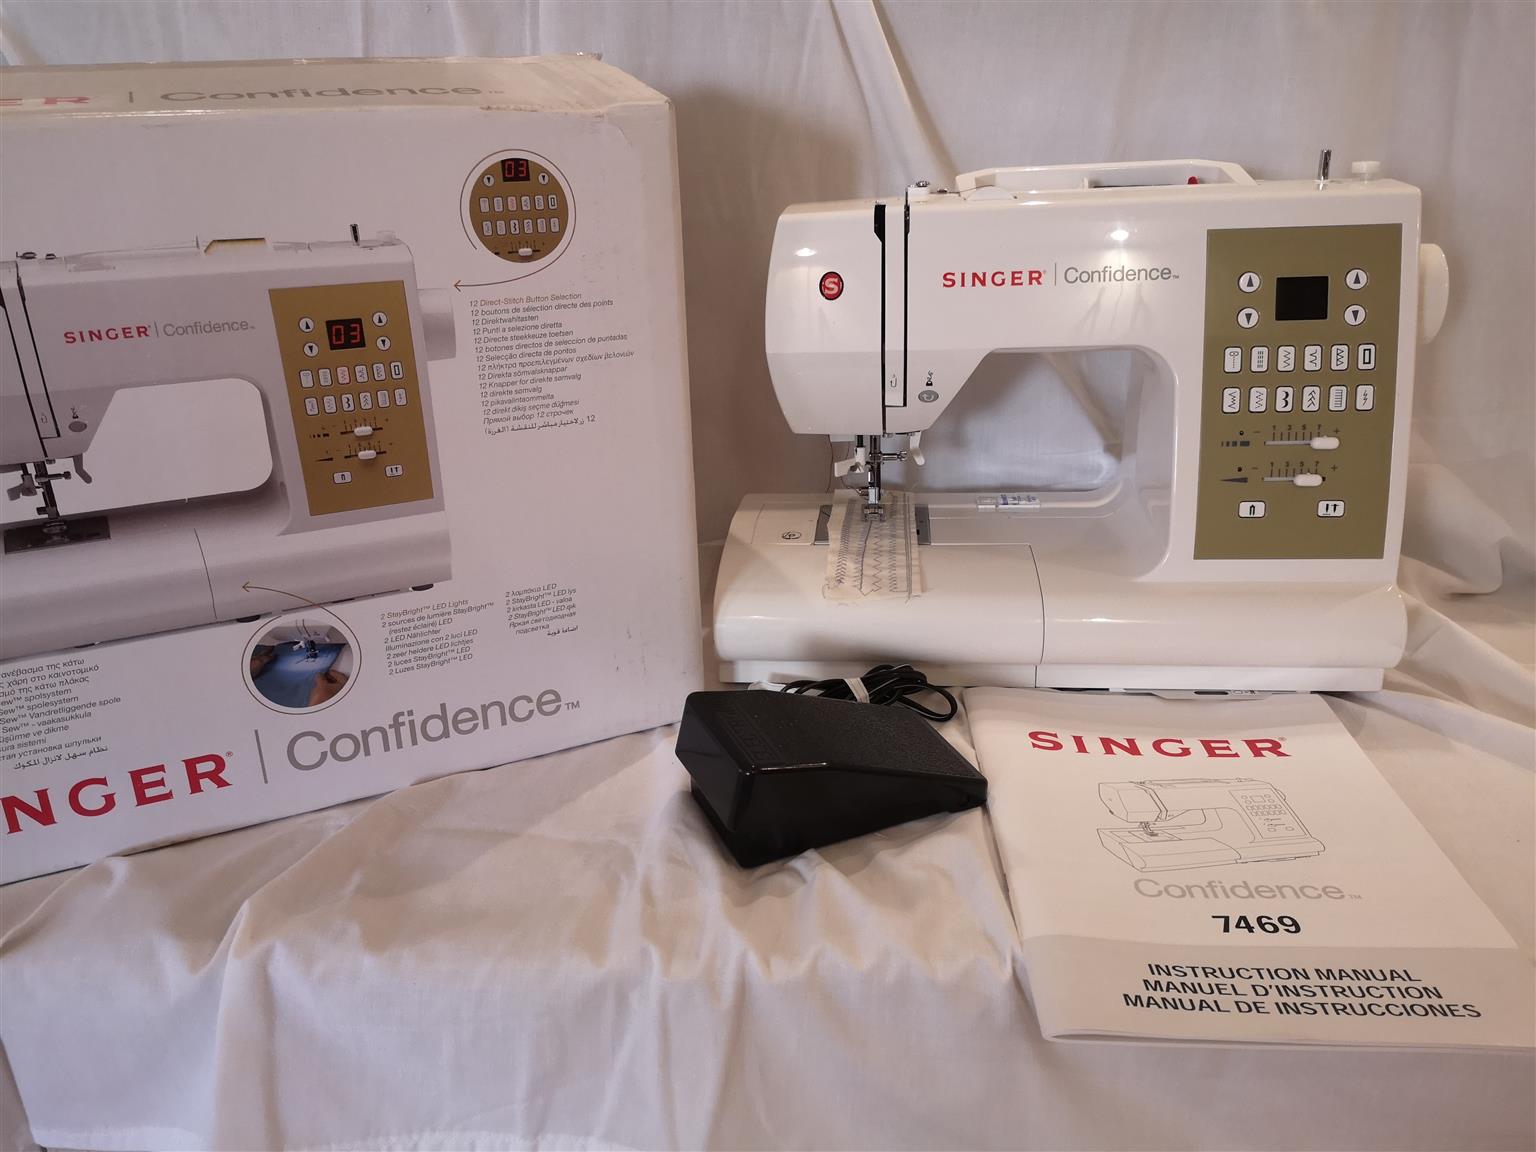 Singer Confidence sewing machine. Brand new, still in box with all accessories a